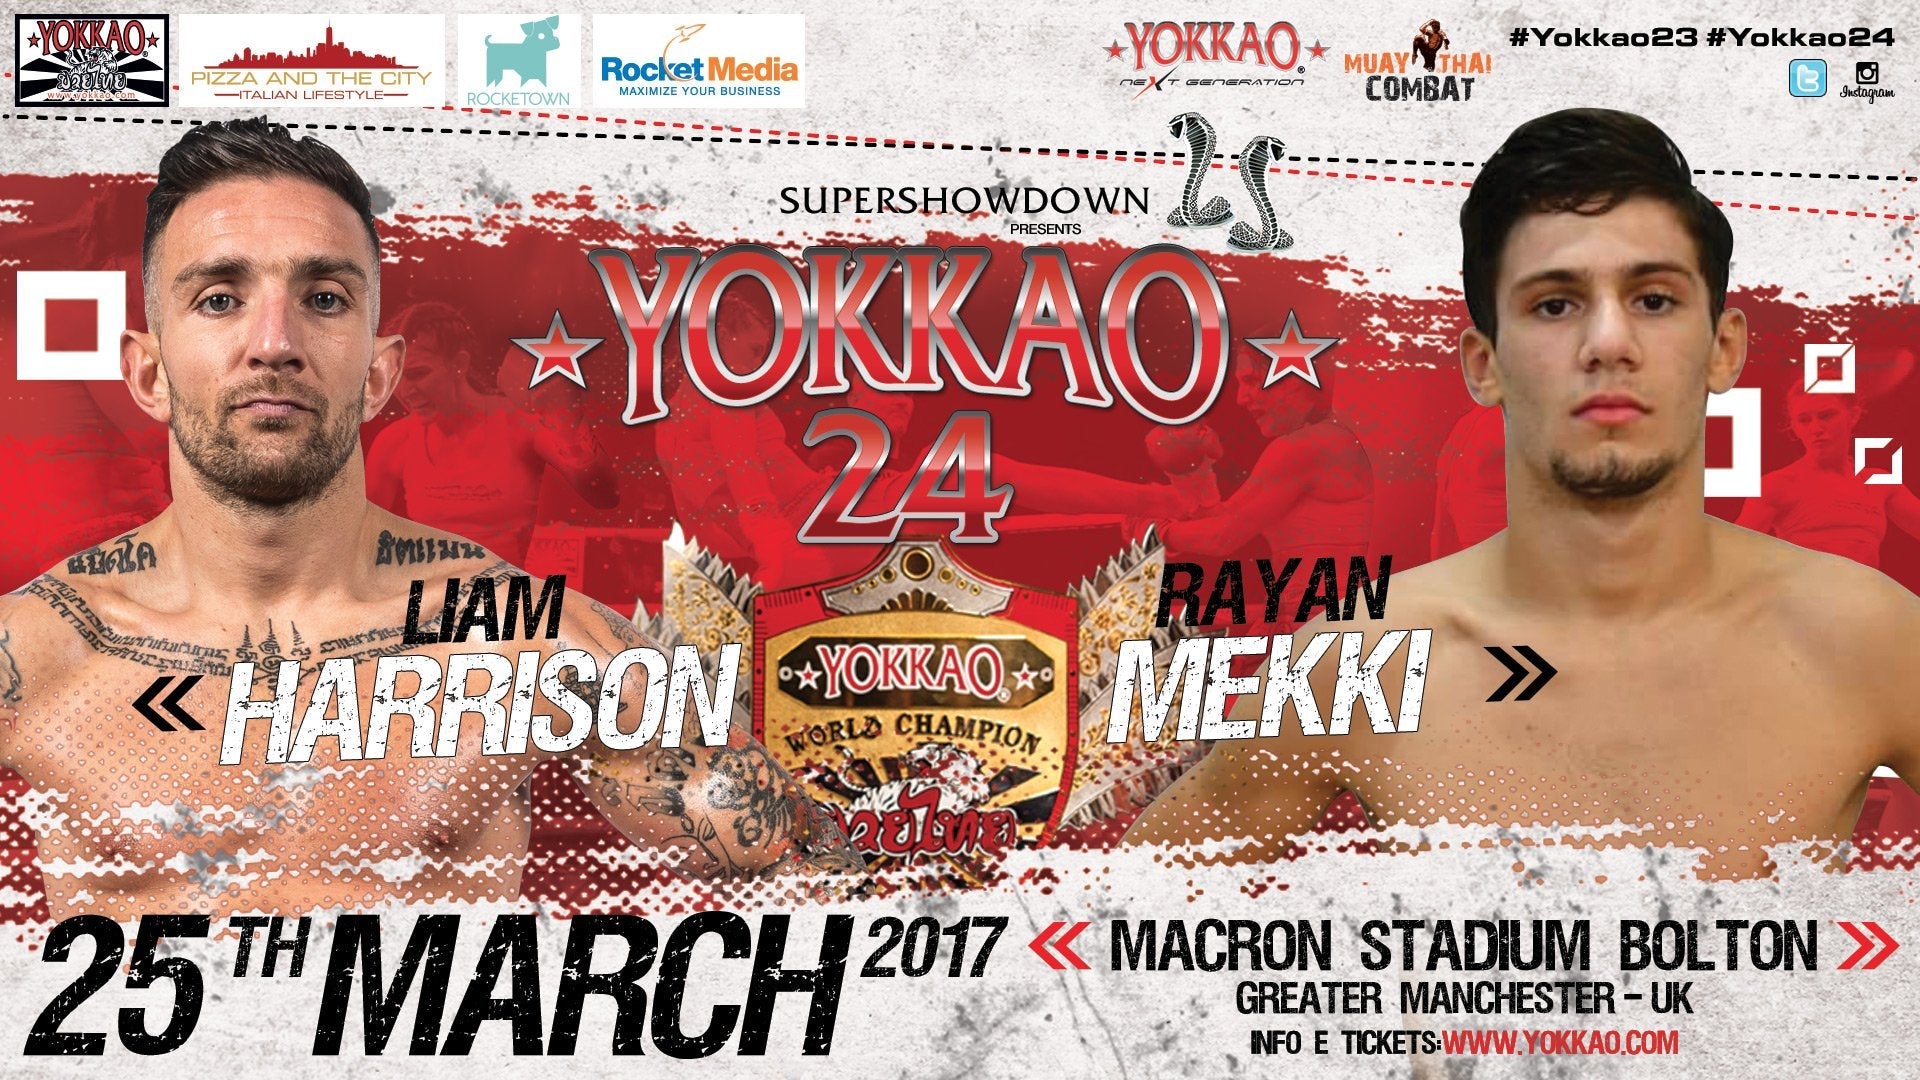 Liam Harrison set to defend the World Title against Rayan Mekki!